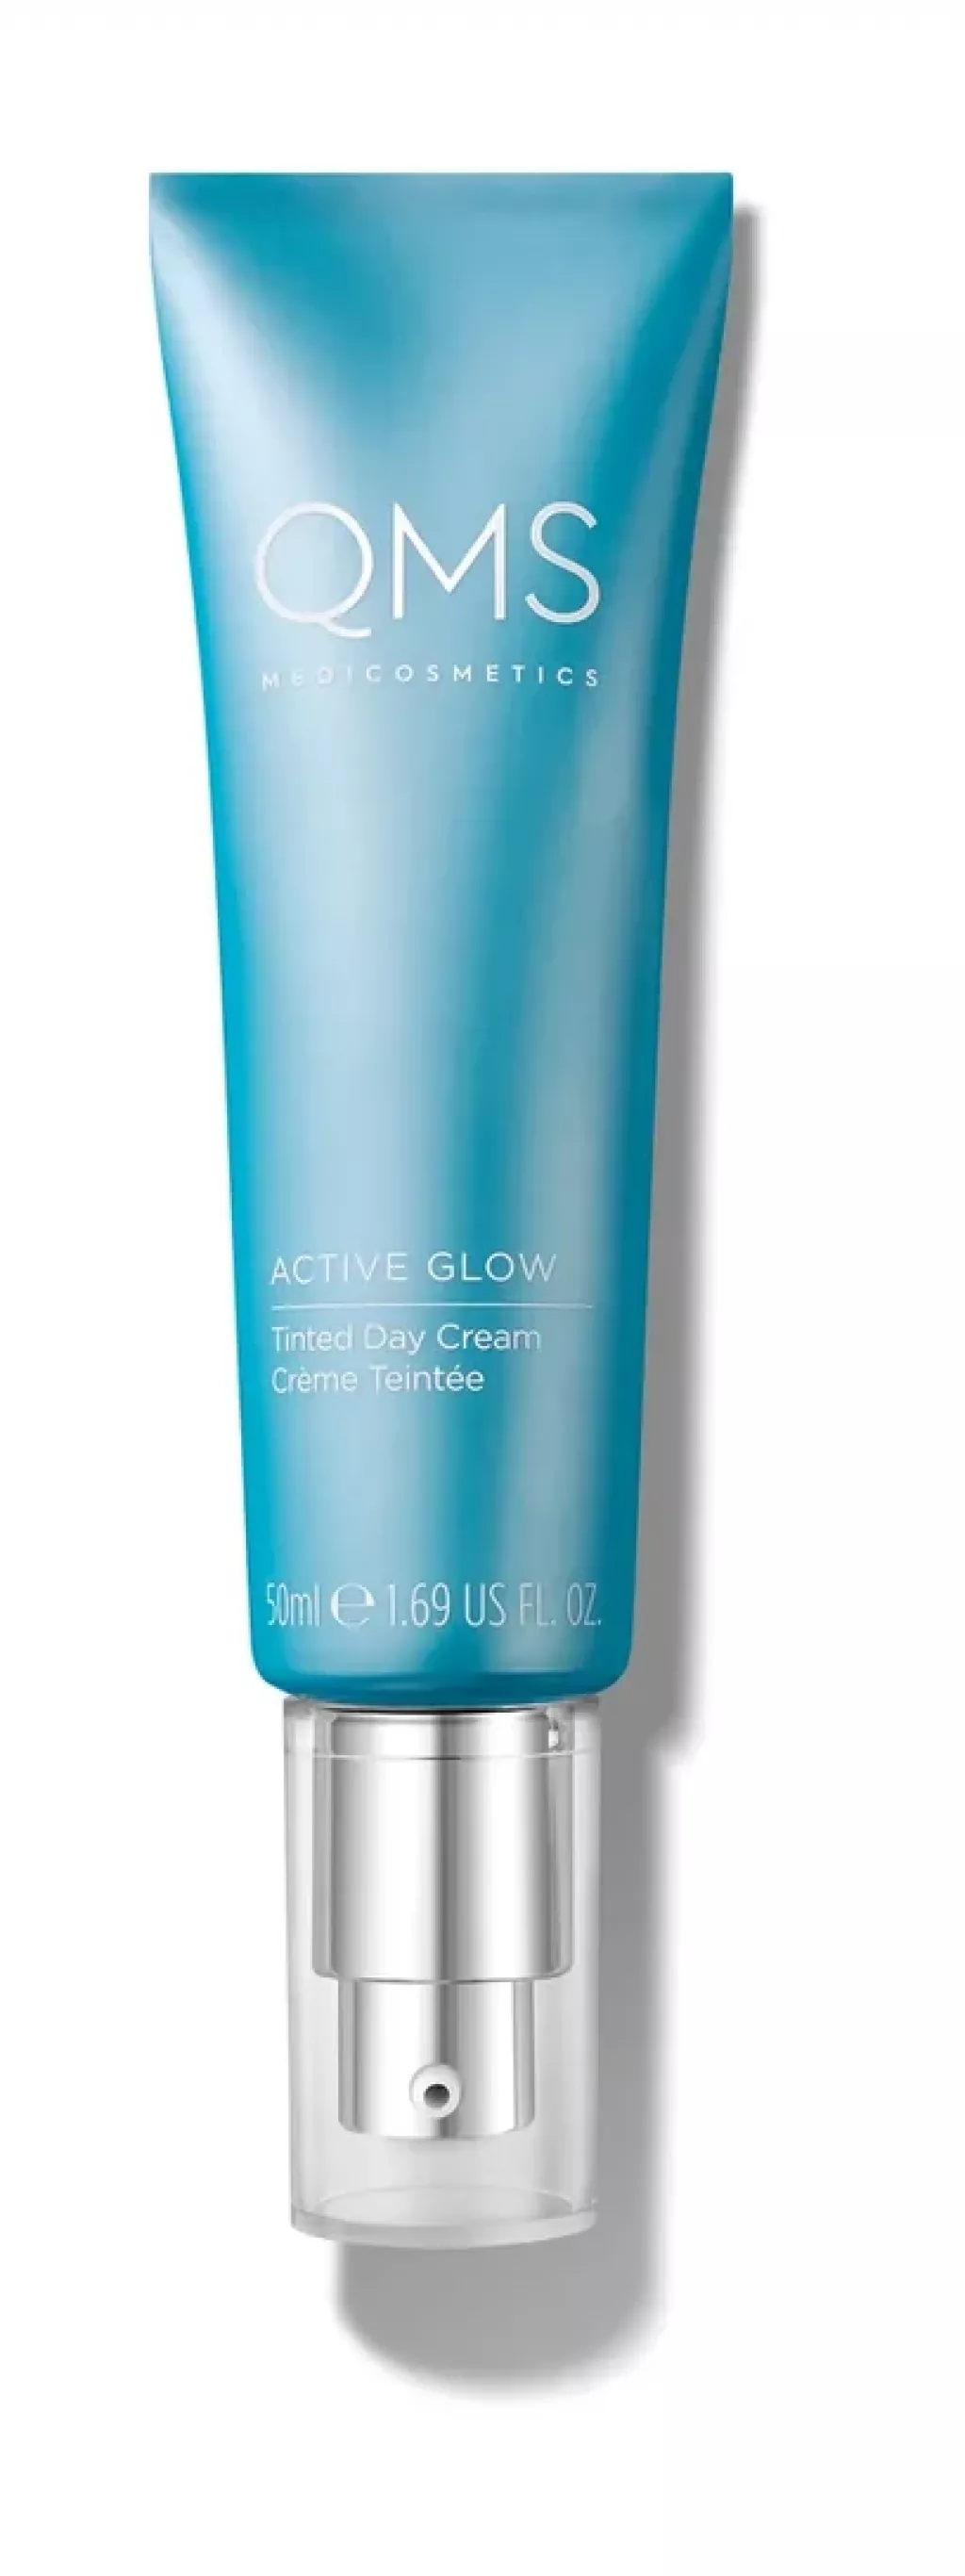 ACTIVE GLOW SPF 15 TINTED DAY CREAM 